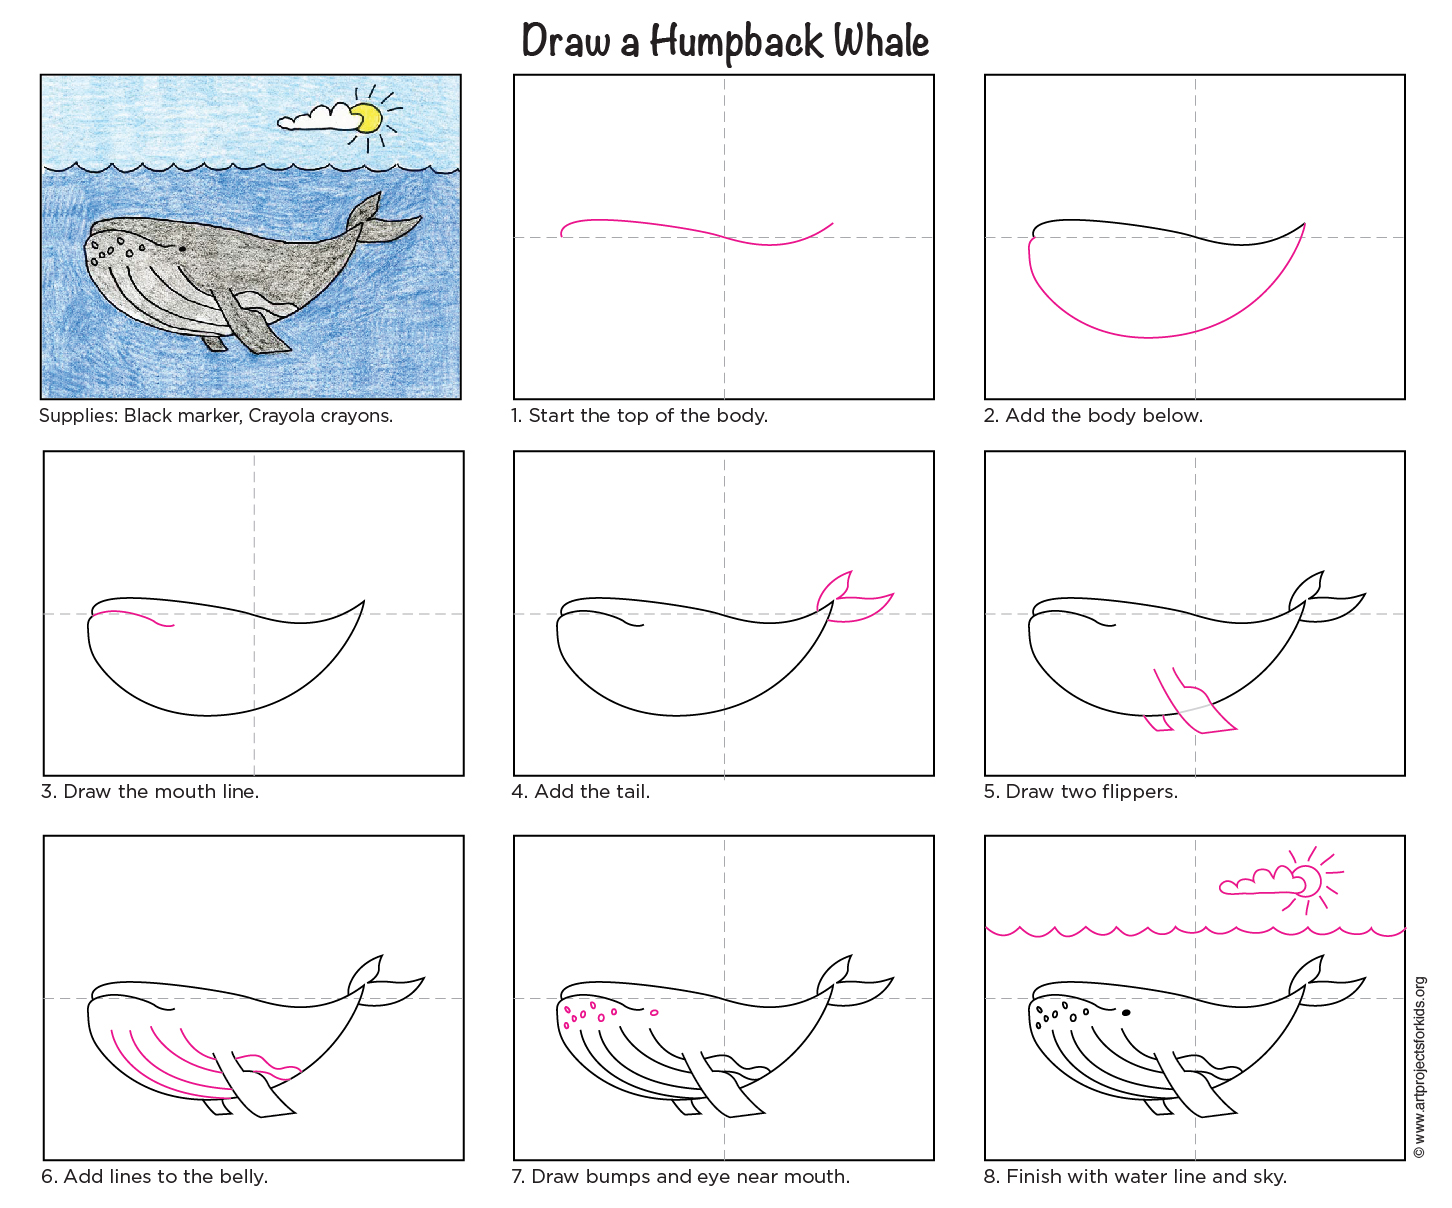 Draw a Humpback Whale Art Projects for Kids